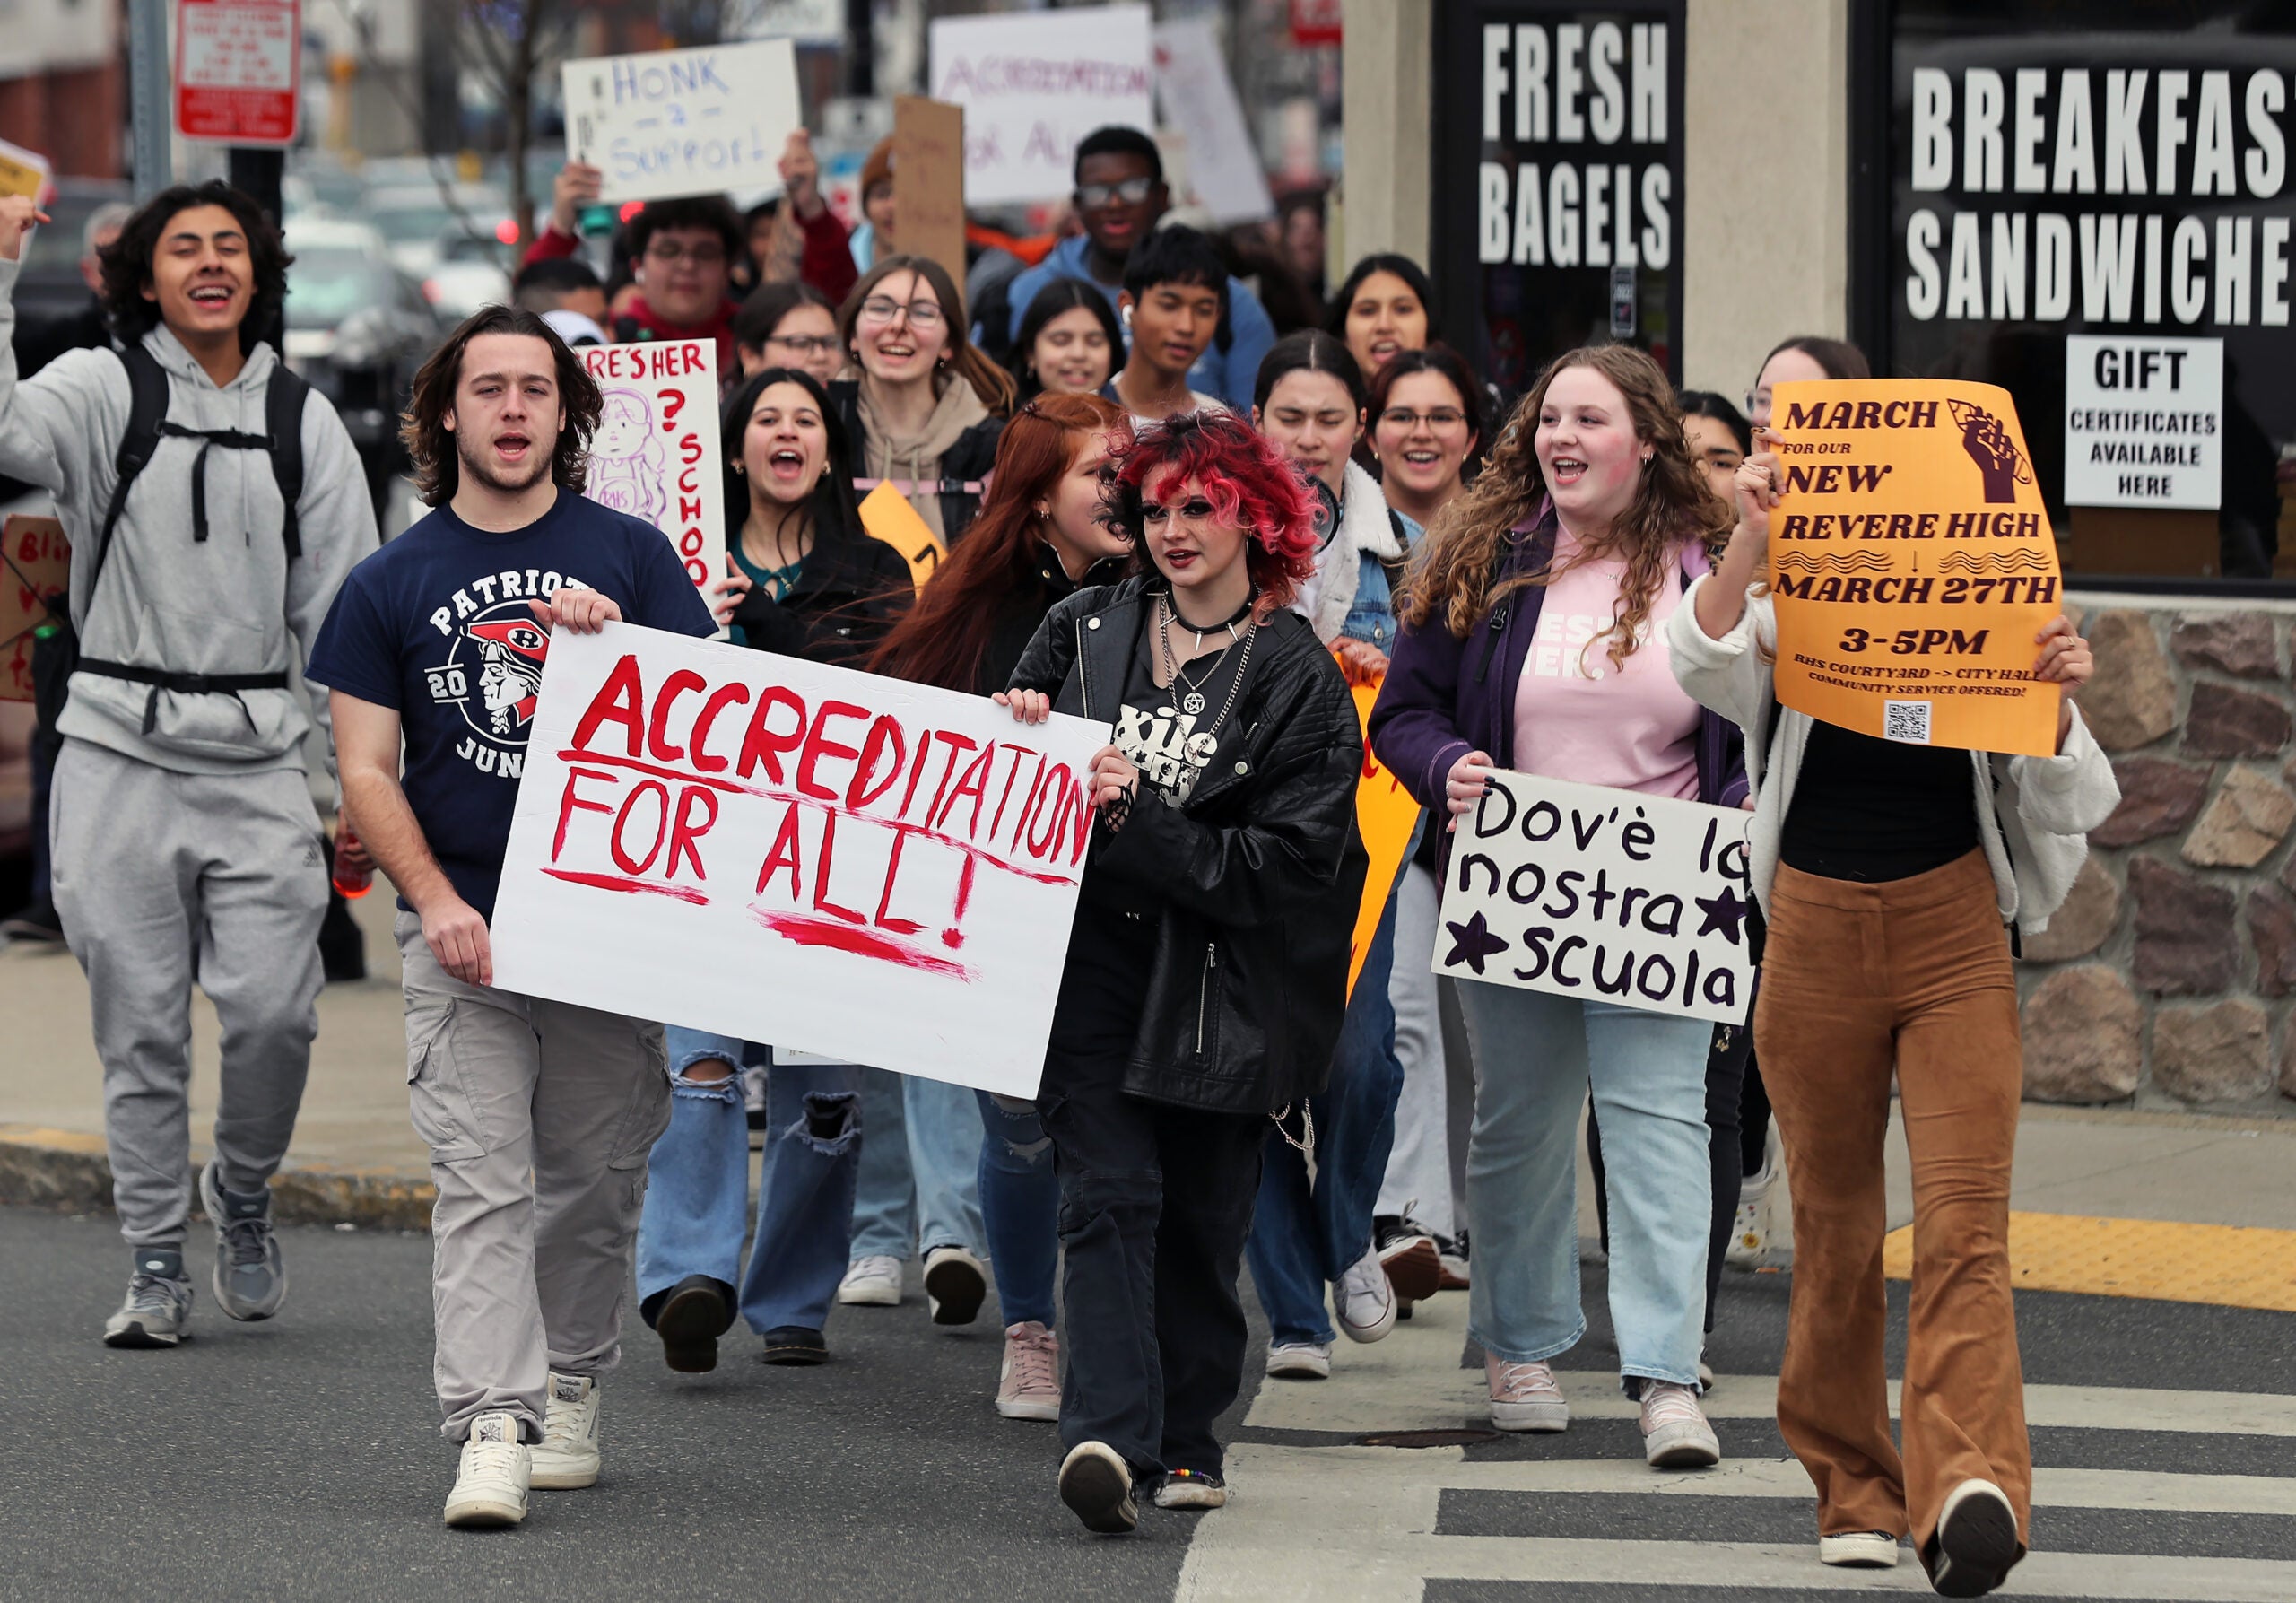 Revere High School students are pictured mid-march, holding signs in protest.